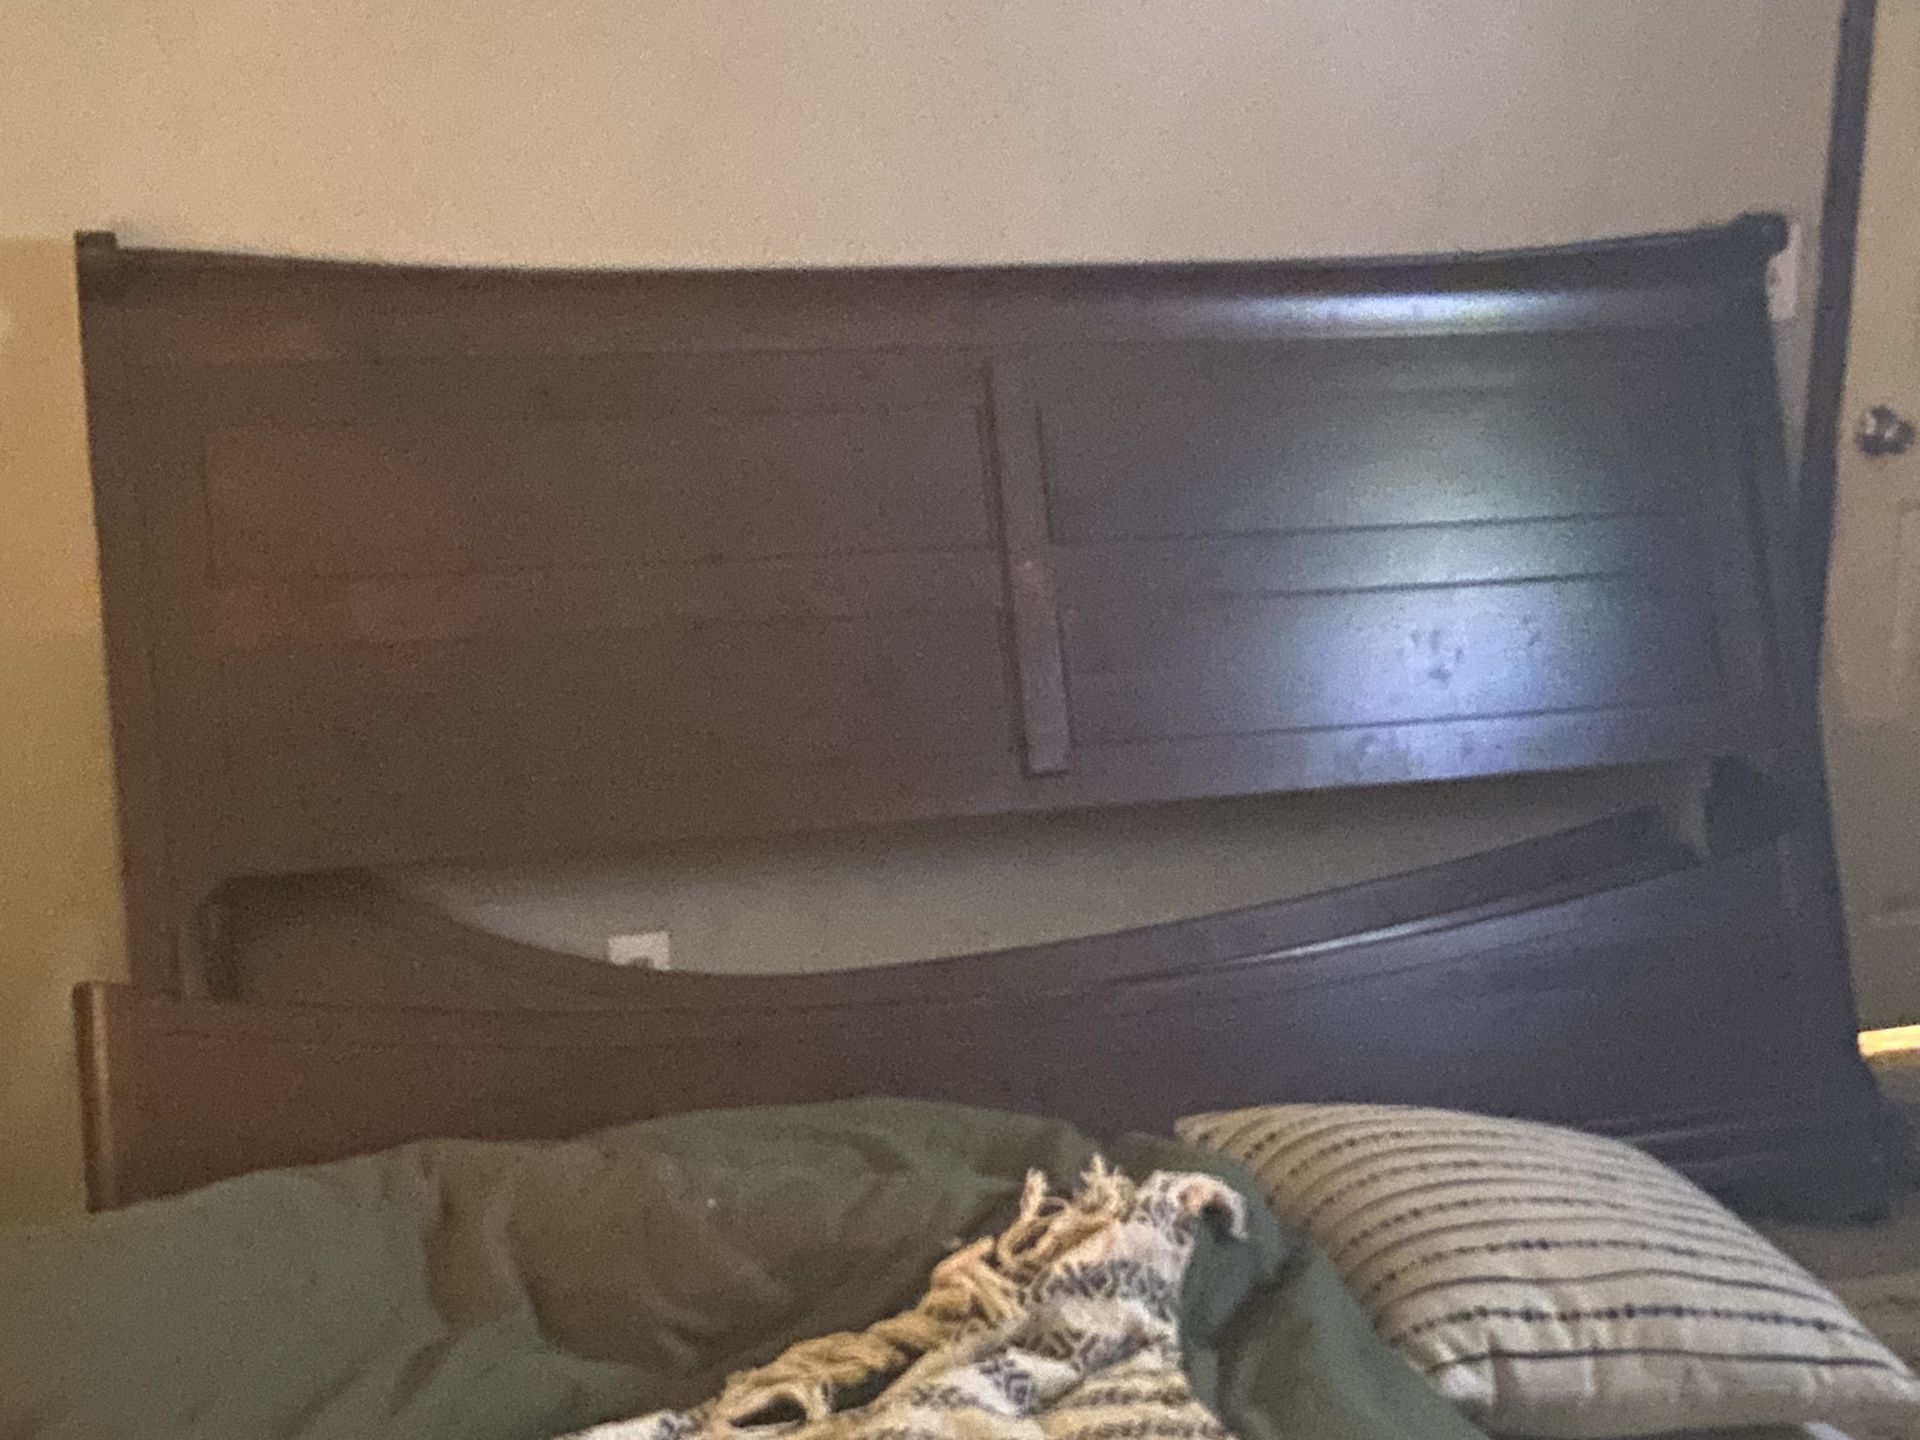 King Size Headboard And Foot Board With Side Rails  Real Sturdy Wood !!!All Around Great Style In Great Condition!